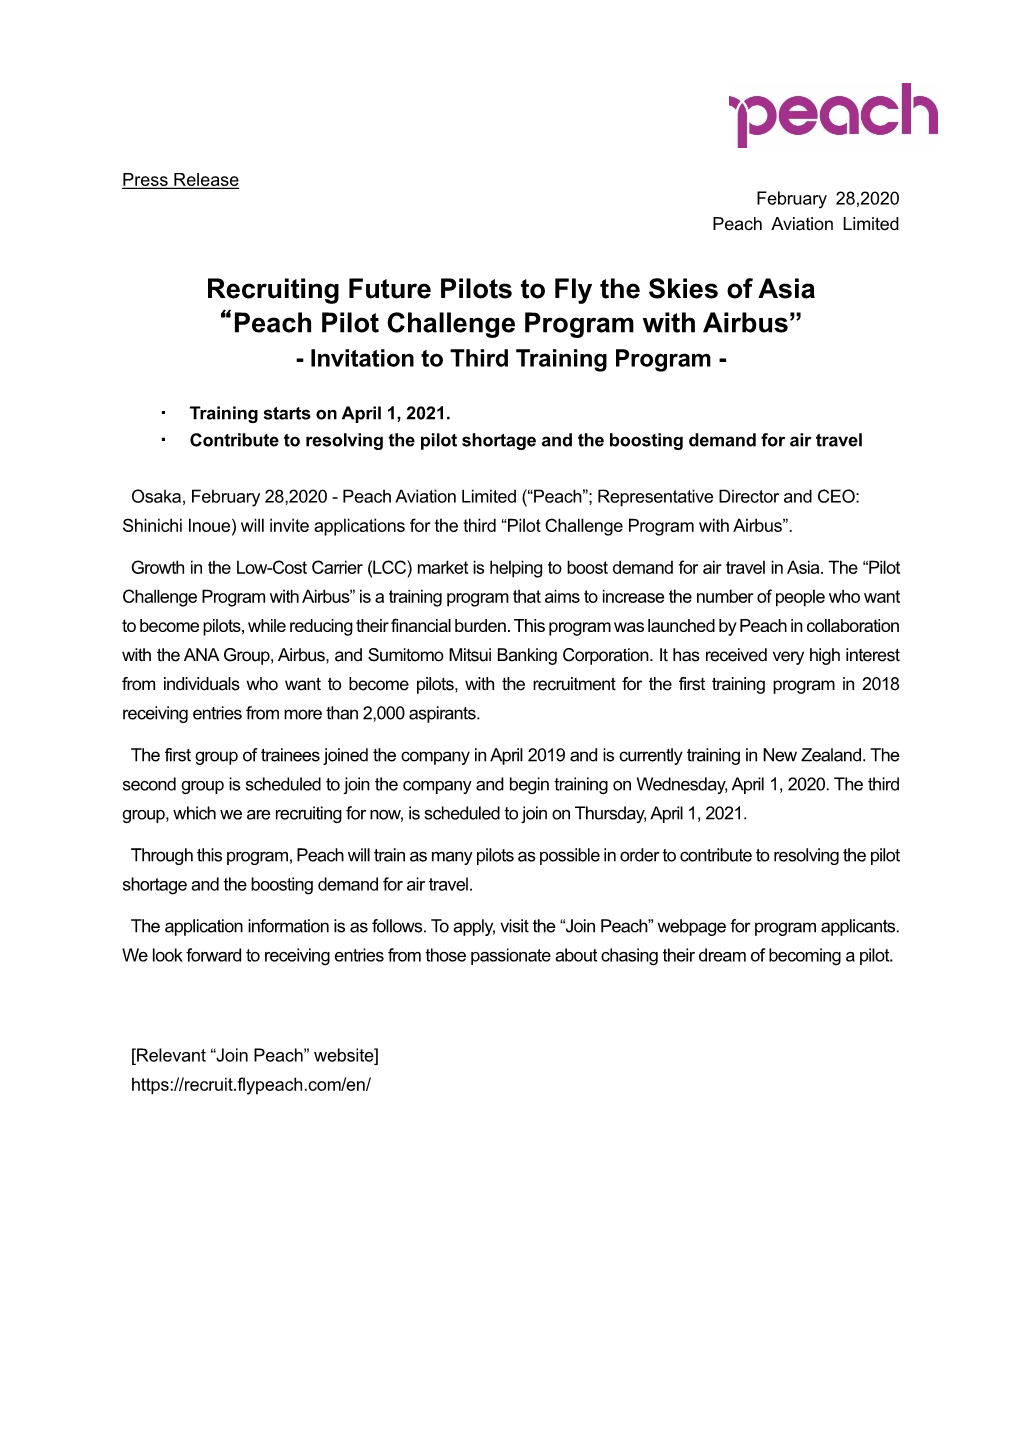 Recruiting Future Pilots to Fly the Skies of Asia “Peach Pilot Challenge Program with Airbus” - Invitation to Third Training Program